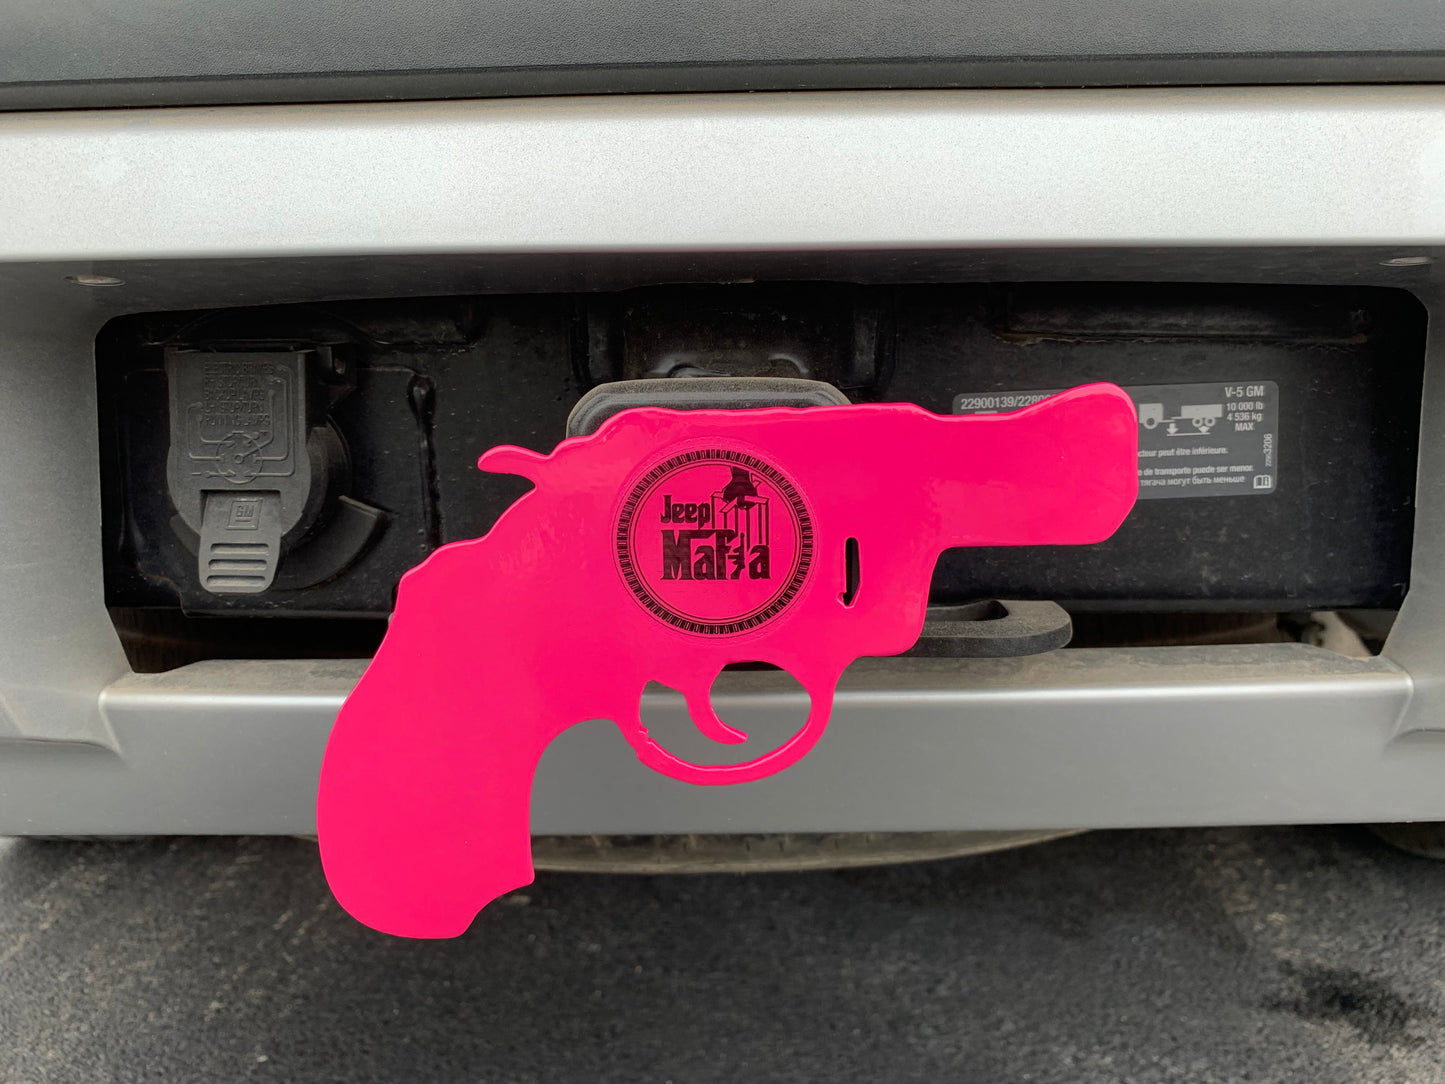 Gun-Revolver Receiver Hitch Cover Your Color Choice-Personalize